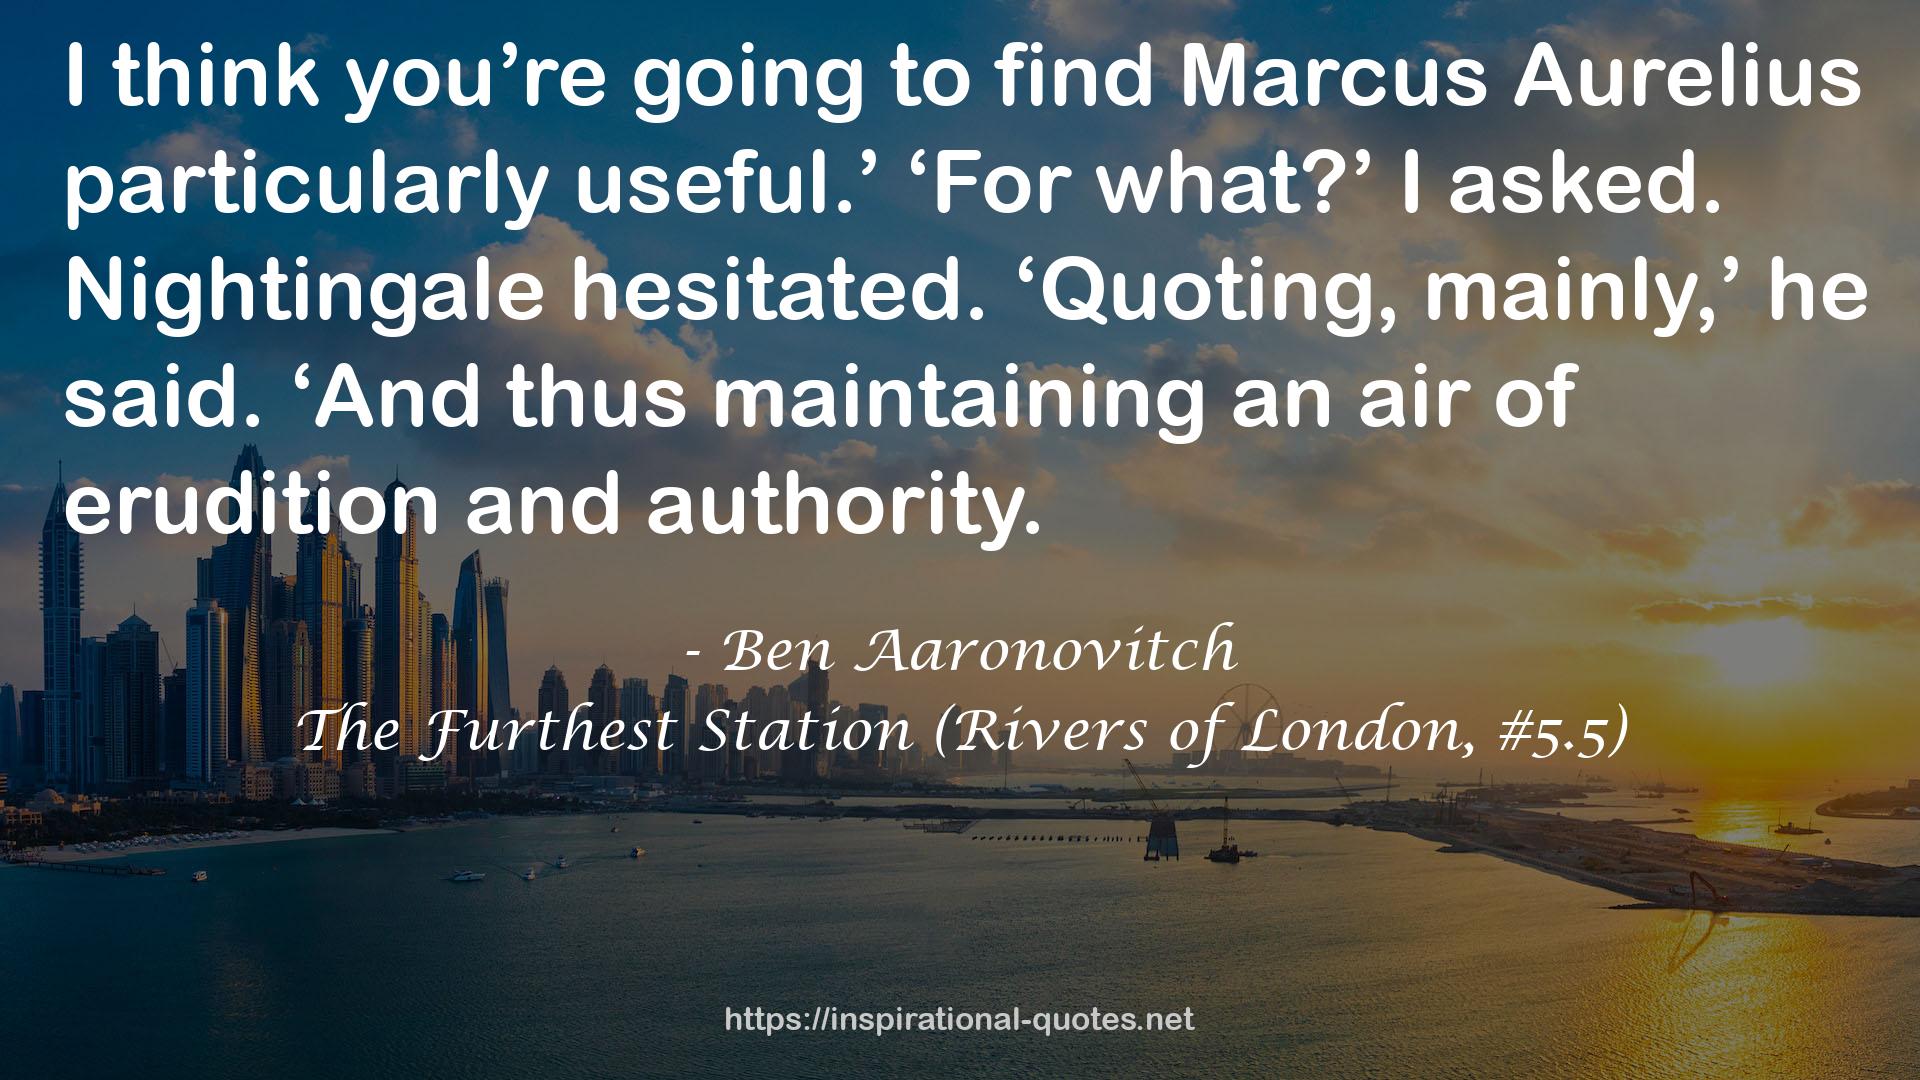 The Furthest Station (Rivers of London, #5.5) QUOTES